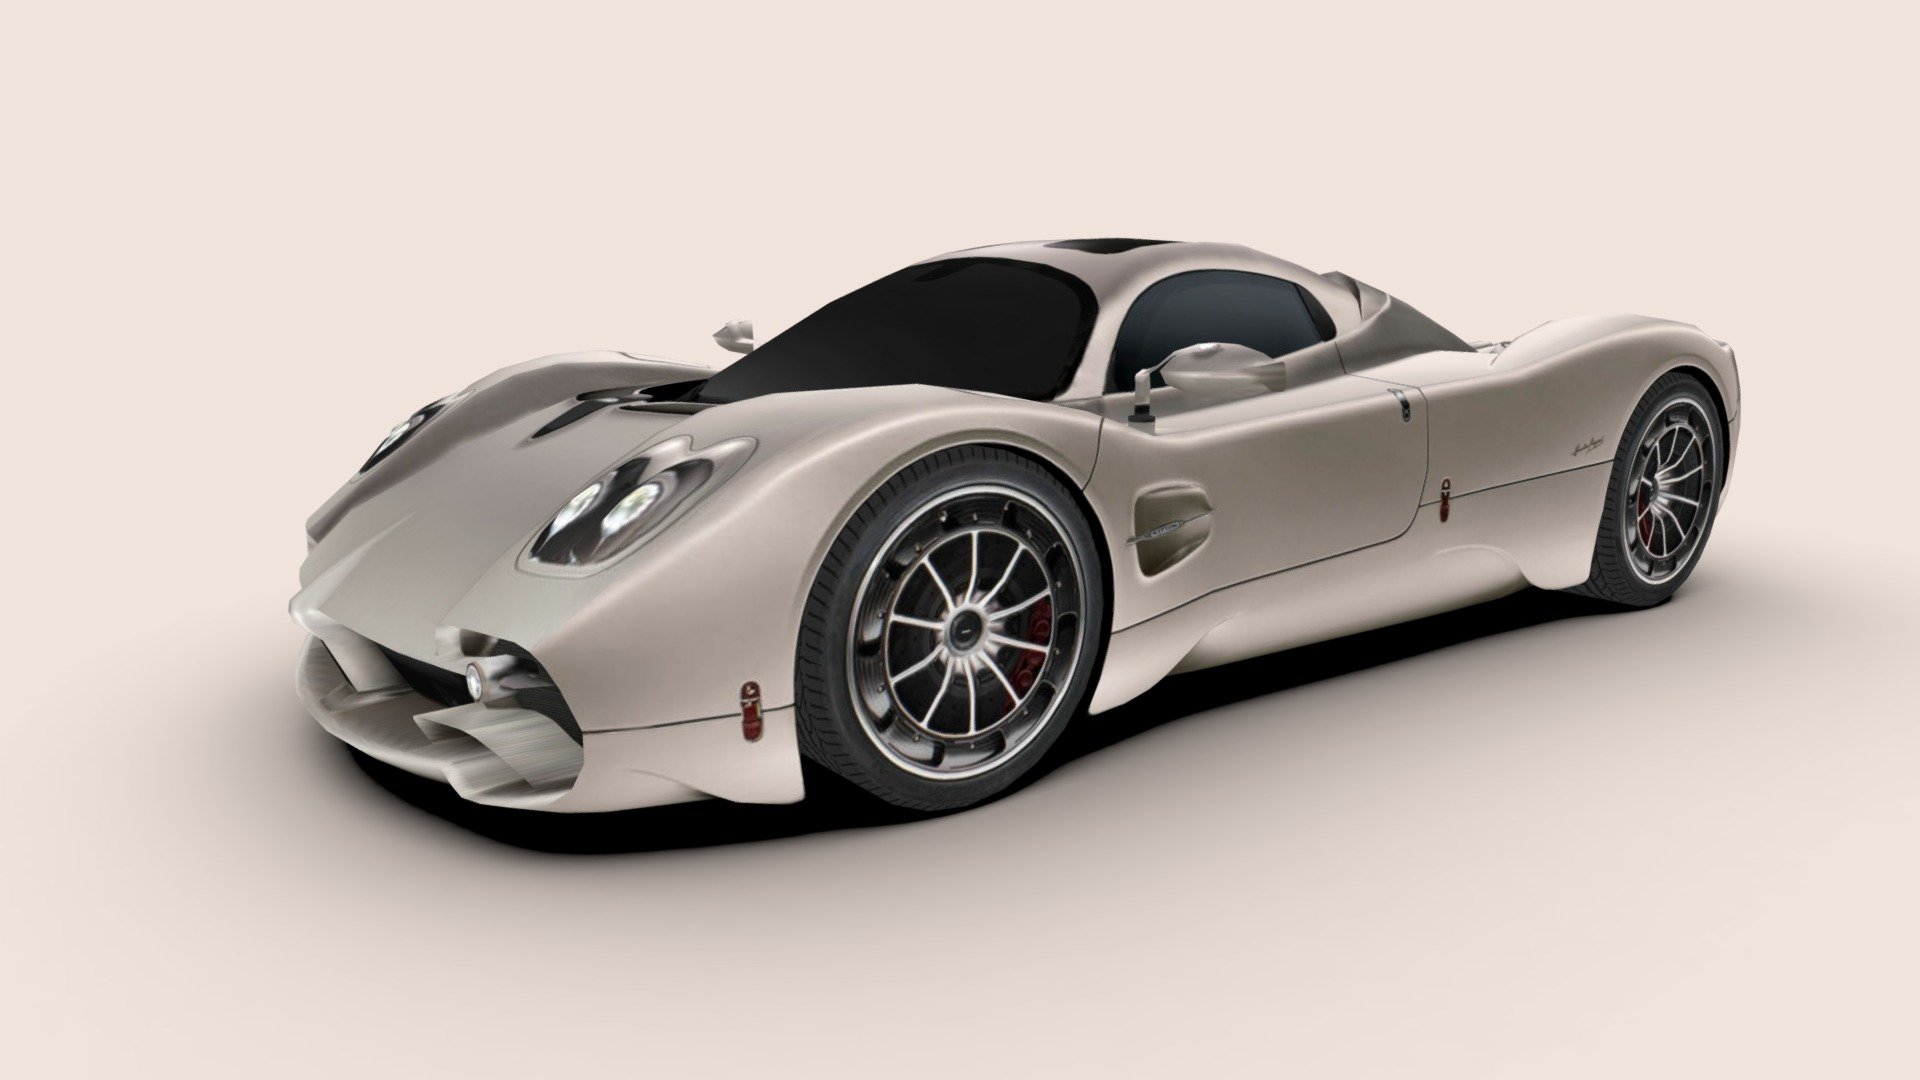 3d model of the 2023 Pagani Utopia, a super sports car (grand tourer, 2-door coupé, mid-engine)

The model is very low-poly, full-scale, real photos texture (single 2048 x 2048 png).

Package includes 5 file formats and texture (3ds, fbx, dae, obj and skp)

Hope you enjoy it.

José Bronze - Pagani Utopia 2023 - Buy Royalty Free 3D model by Jose Bronze (@pinceladas3d) 3d model